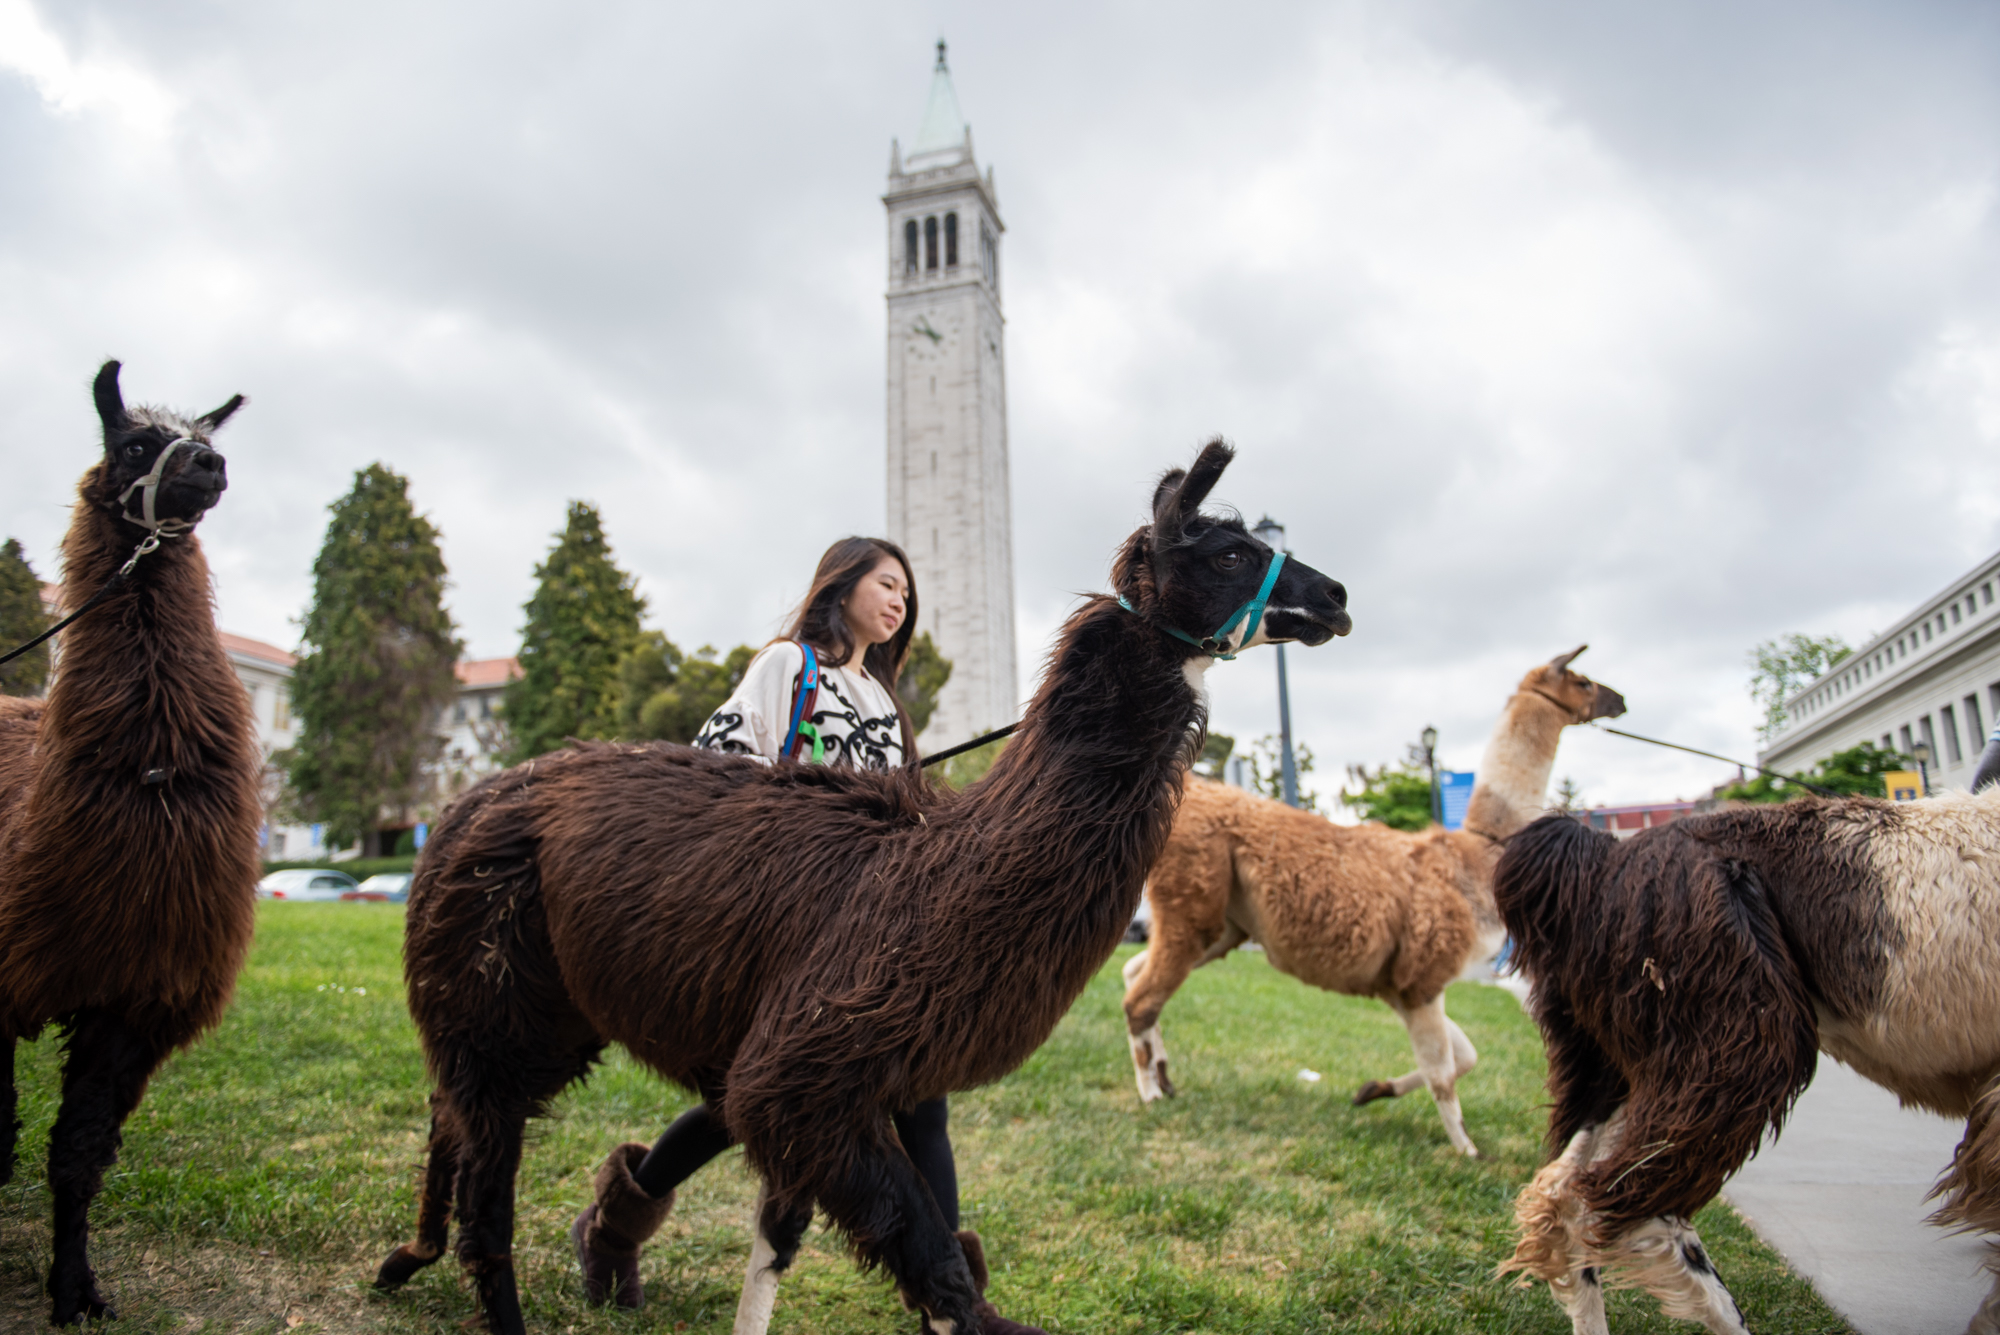  Llamas and their handlers head out near the Campanile at UC Berkeley for Llama-Palooza on Friday, April 27, 2018. | Rosa Furneaux, Special To The Chronicle 